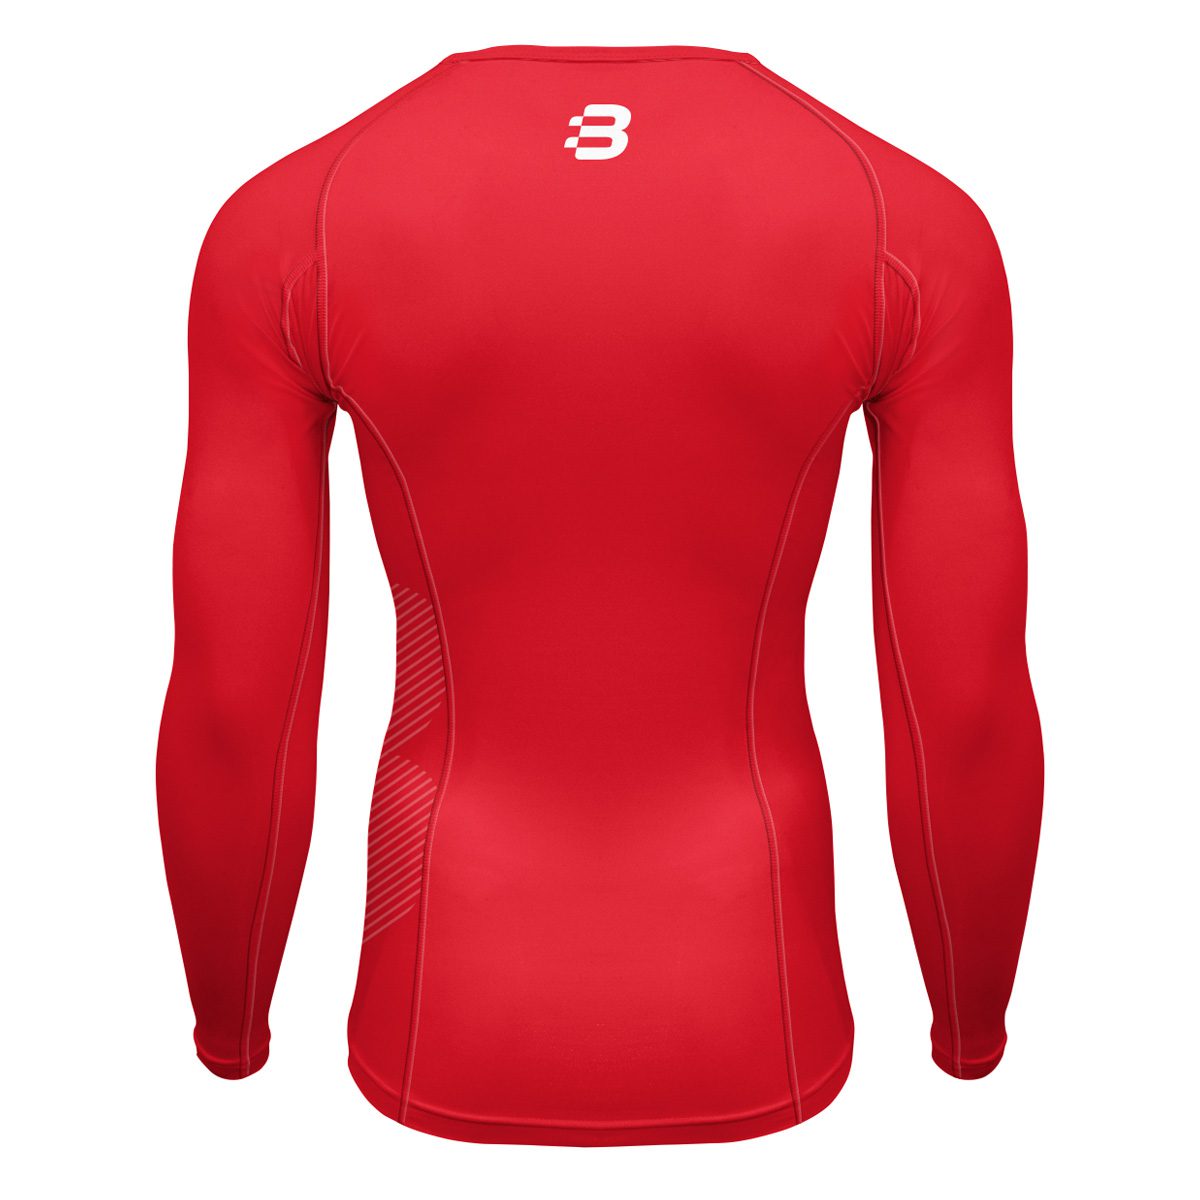 Mens Compression Long Sleeve Top - Red - Blackchrome